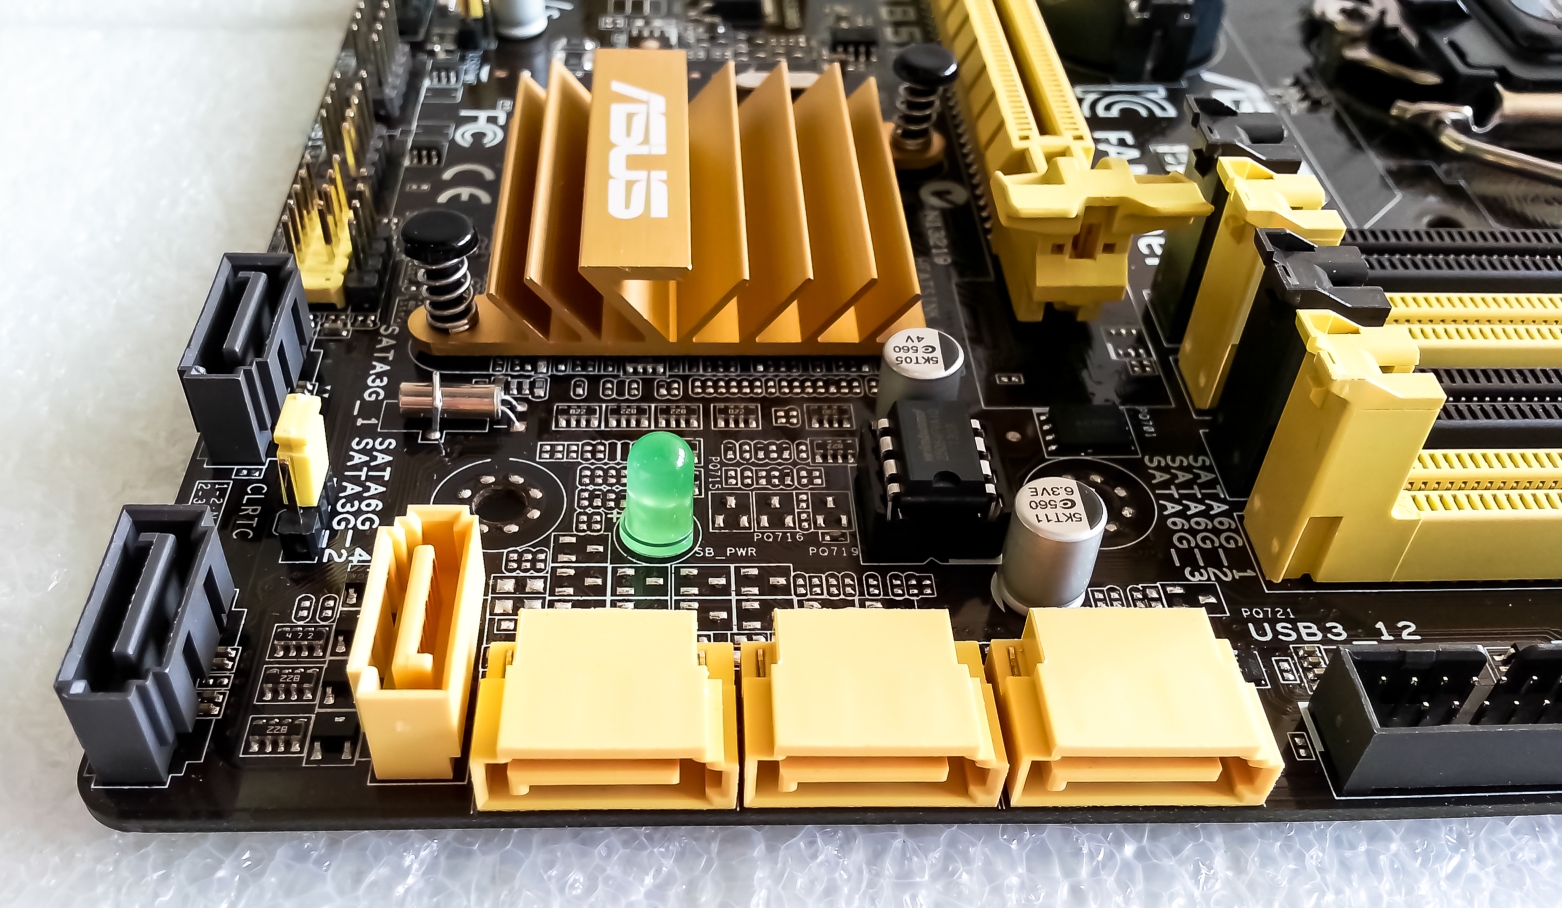 ASUS B85M-G Haswell Motherboard - Cheap and Reliable? - The Tech